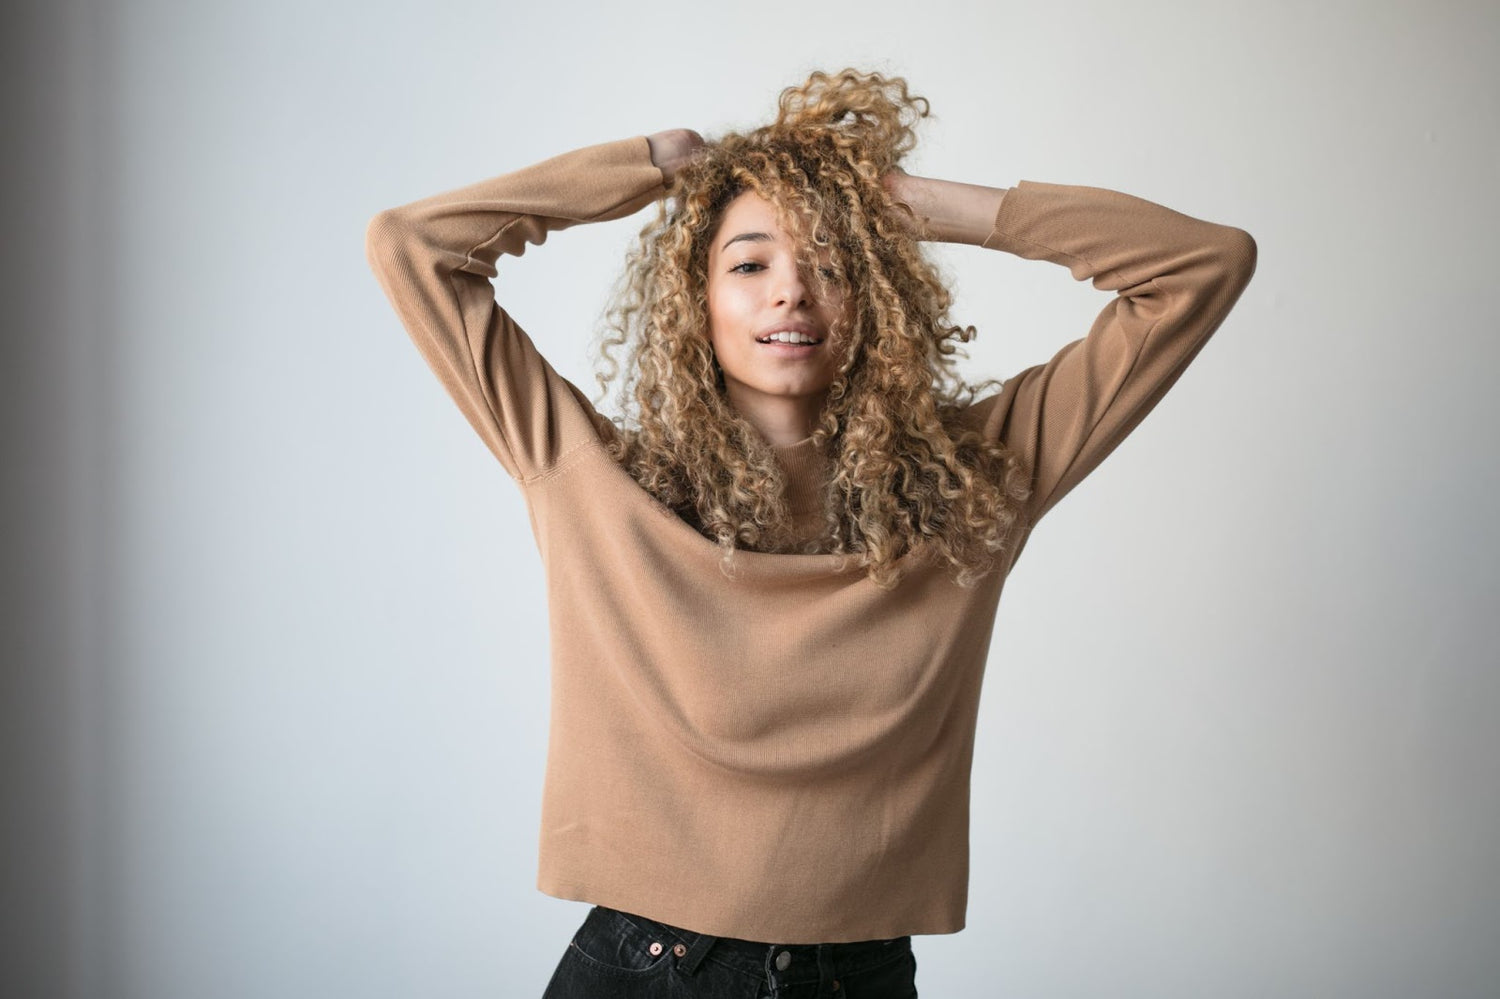 The Best Shampoo for Curly Hair: Key Ingredients and Washing Tips